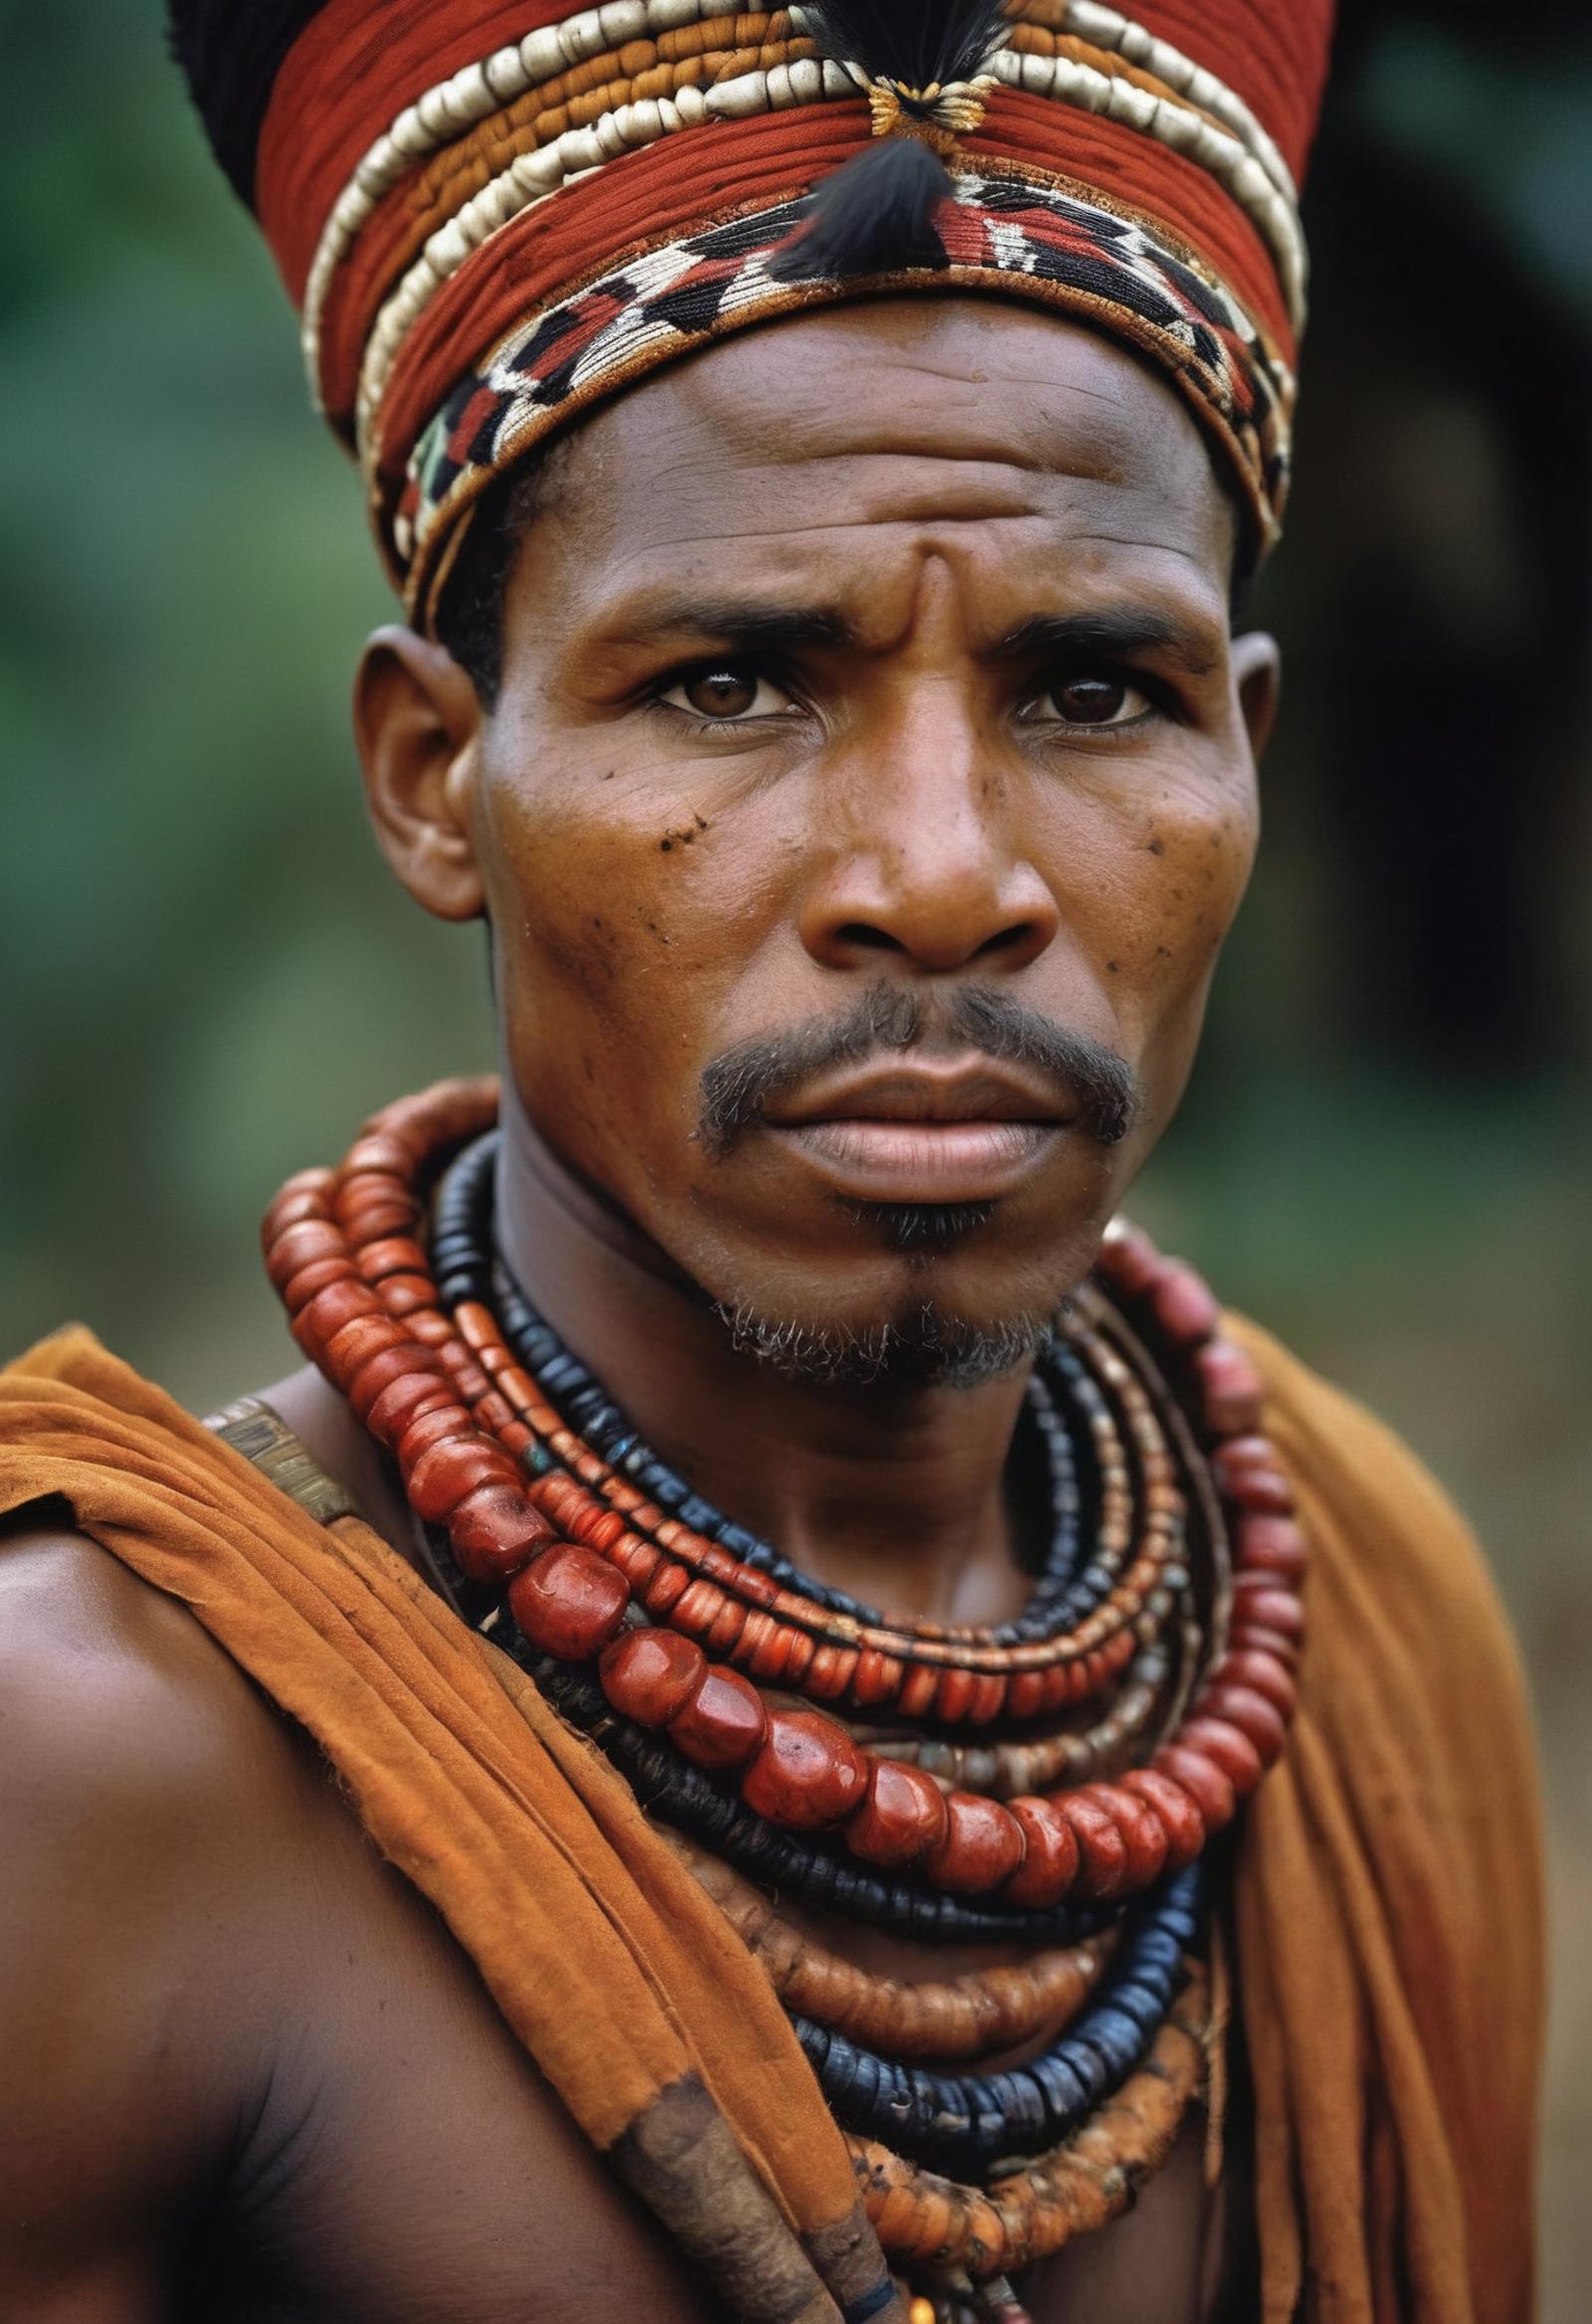 Close-up of a man with a beard, wearing a colorful necklace and hat, possibly from an African tribe.